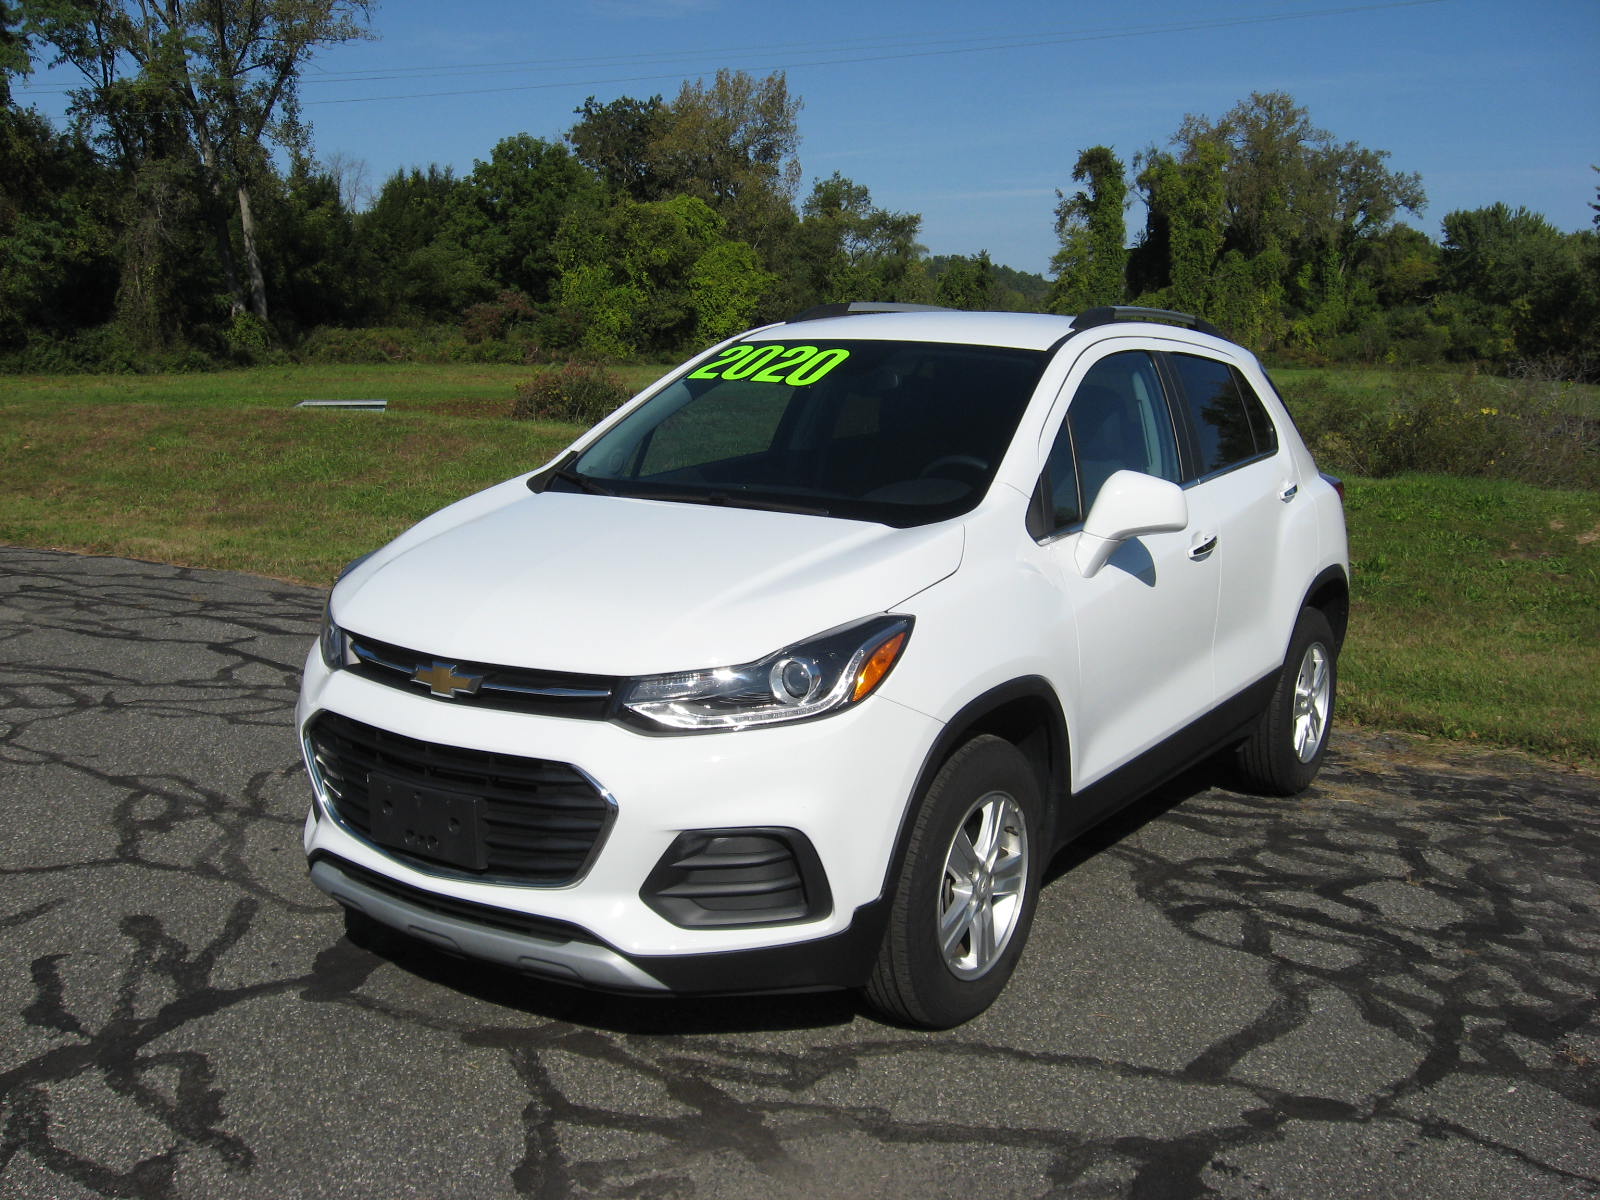 2020 Chevrolet Trax Vehicle Photo in SHEFFIELD, MA 01257-9563